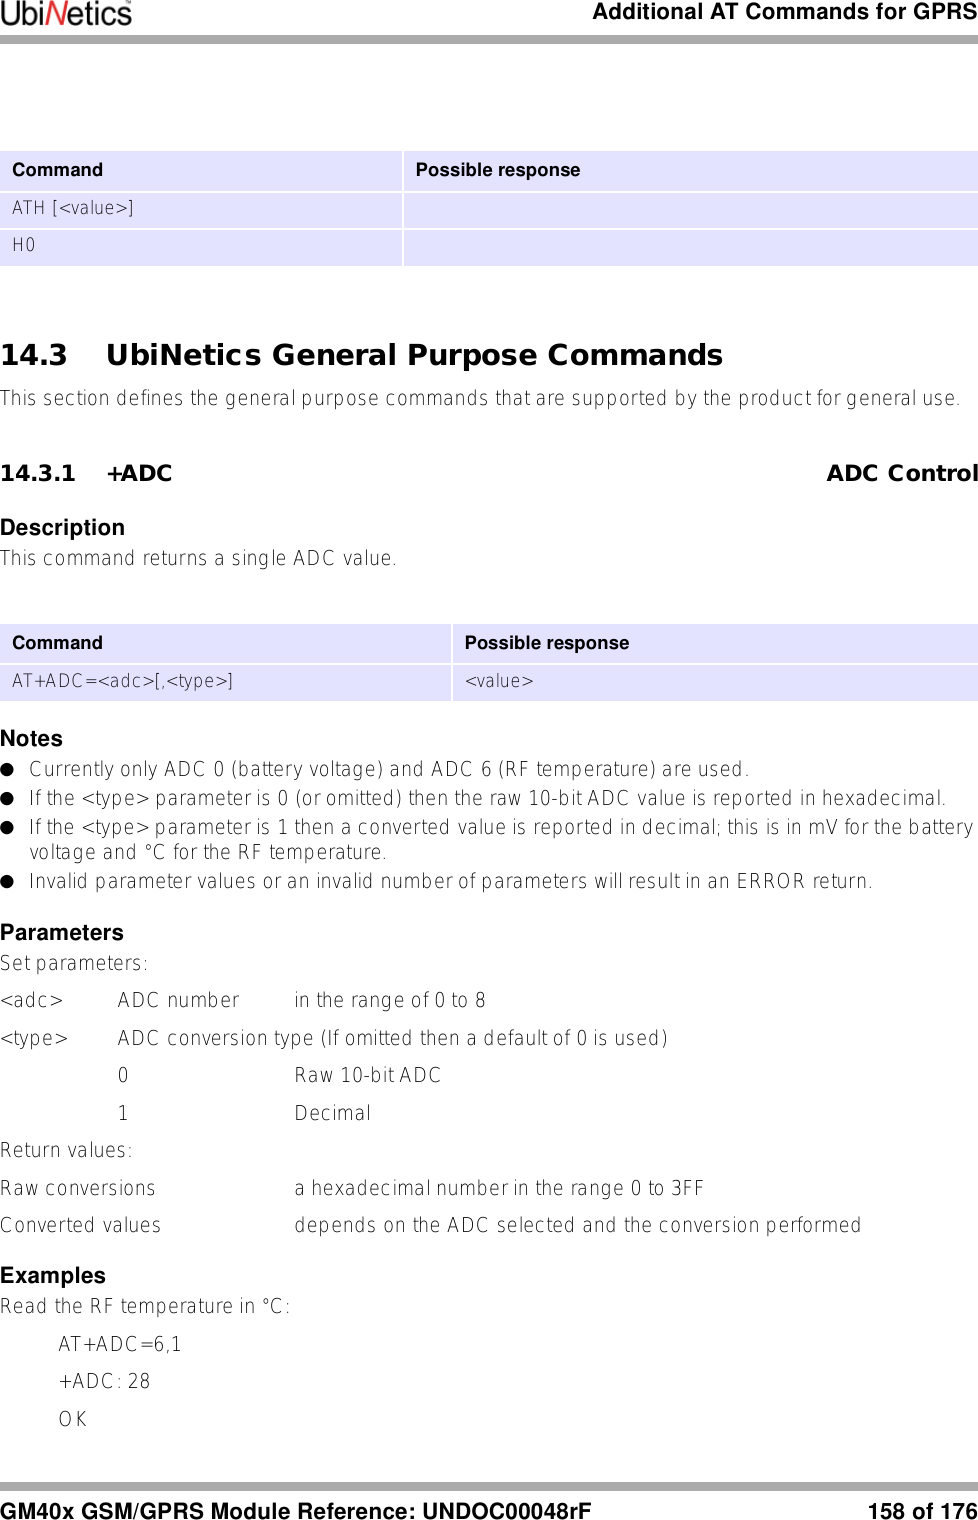 Additional AT Commands for GPRSGM40x GSM/GPRS Module Reference: UNDOC00048rF 158 of 17614.3 UbiNetics General Purpose CommandsThis section defines the general purpose commands that are supported by the product for general use.14.3.1 +ADC ADC ControlDescriptionThis command returns a single ADC value.Notes●Currently only ADC 0 (battery voltage) and ADC 6 (RF temperature) are used.●If the &lt;type&gt; parameter is 0 (or omitted) then the raw 10-bit ADC value is reported in hexadecimal.●If the &lt;type&gt; parameter is 1 then a converted value is reported in decimal; this is in mV for the battery voltage and °C for the RF temperature. ●Invalid parameter values or an invalid number of parameters will result in an ERROR return.ParametersSet parameters:&lt;adc&gt; ADC number in the range of 0 to 8&lt;type&gt;  ADC conversion type (If omitted then a default of 0 is used)0 Raw 10-bit ADC1 Decimal Return values:Raw conversions a hexadecimal number in the range 0 to 3FFConverted values  depends on the ADC selected and the conversion performedExamplesRead the RF temperature in °C:AT+ADC=6,1+ADC: 28OKCommand  Possible responseATH [&lt;value&gt;]H0Command Possible responseAT+ADC=&lt;adc&gt;[,&lt;type&gt;] &lt;value&gt;